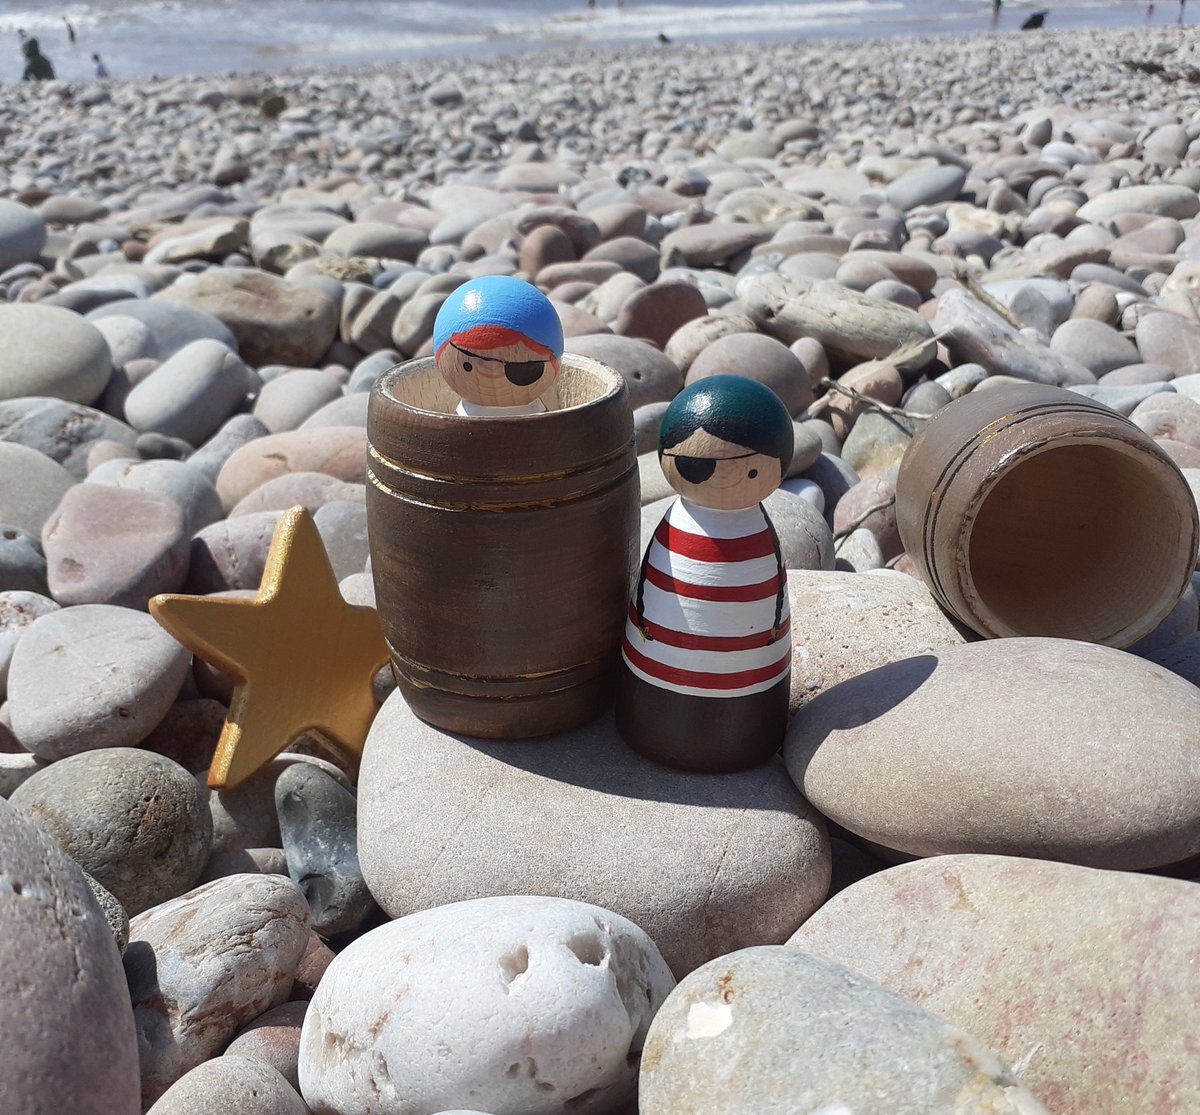 What lovely weather we are having 🌞 
My pirate pals are also enjoying themselves this half term! ☠ 🏴‍☠️ 🦜 
These two P I R A T E S  will be having a rest in my @buyindie store tonight 👇🏻
buyindie.co.uk/store/littlemi…
#piratefun #pirateplay #HalfTerm #shopindie